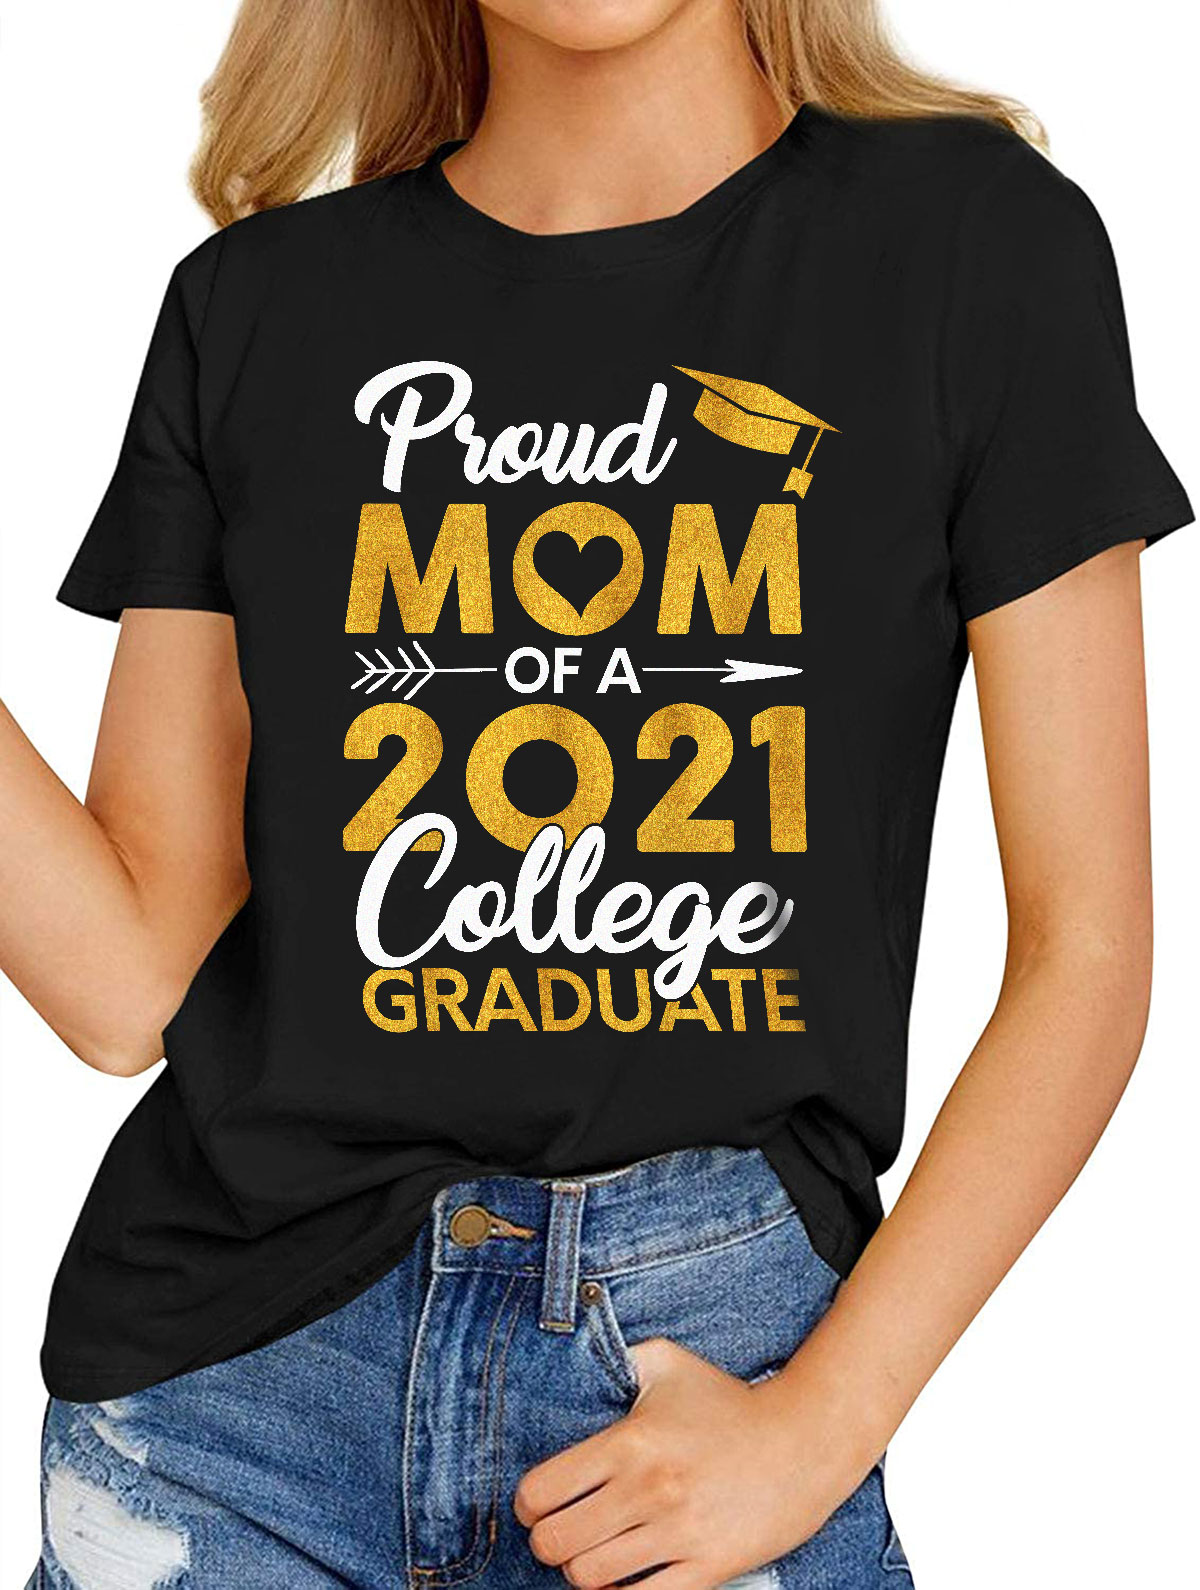 Women’s Fashion T-Shirt – Proud Mom Of A 2021 Graduate College Cool ...